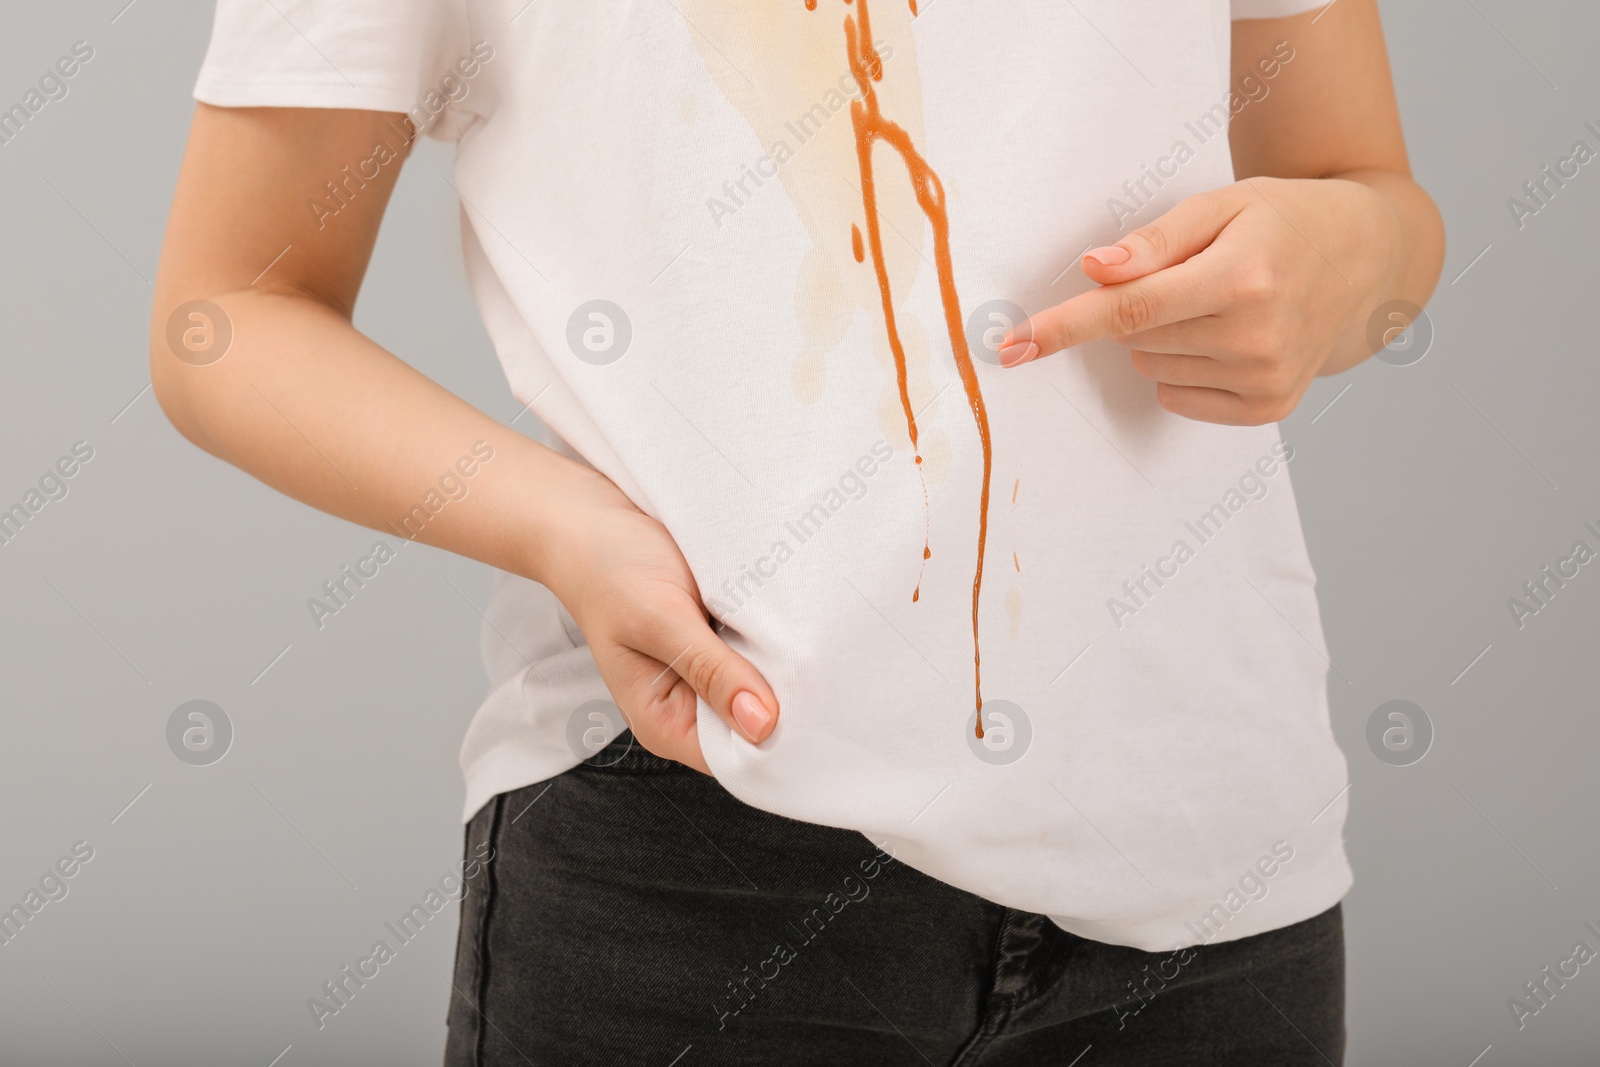 Photo of Woman showing stain from condensed milk on her shirt against light grey background, closeup